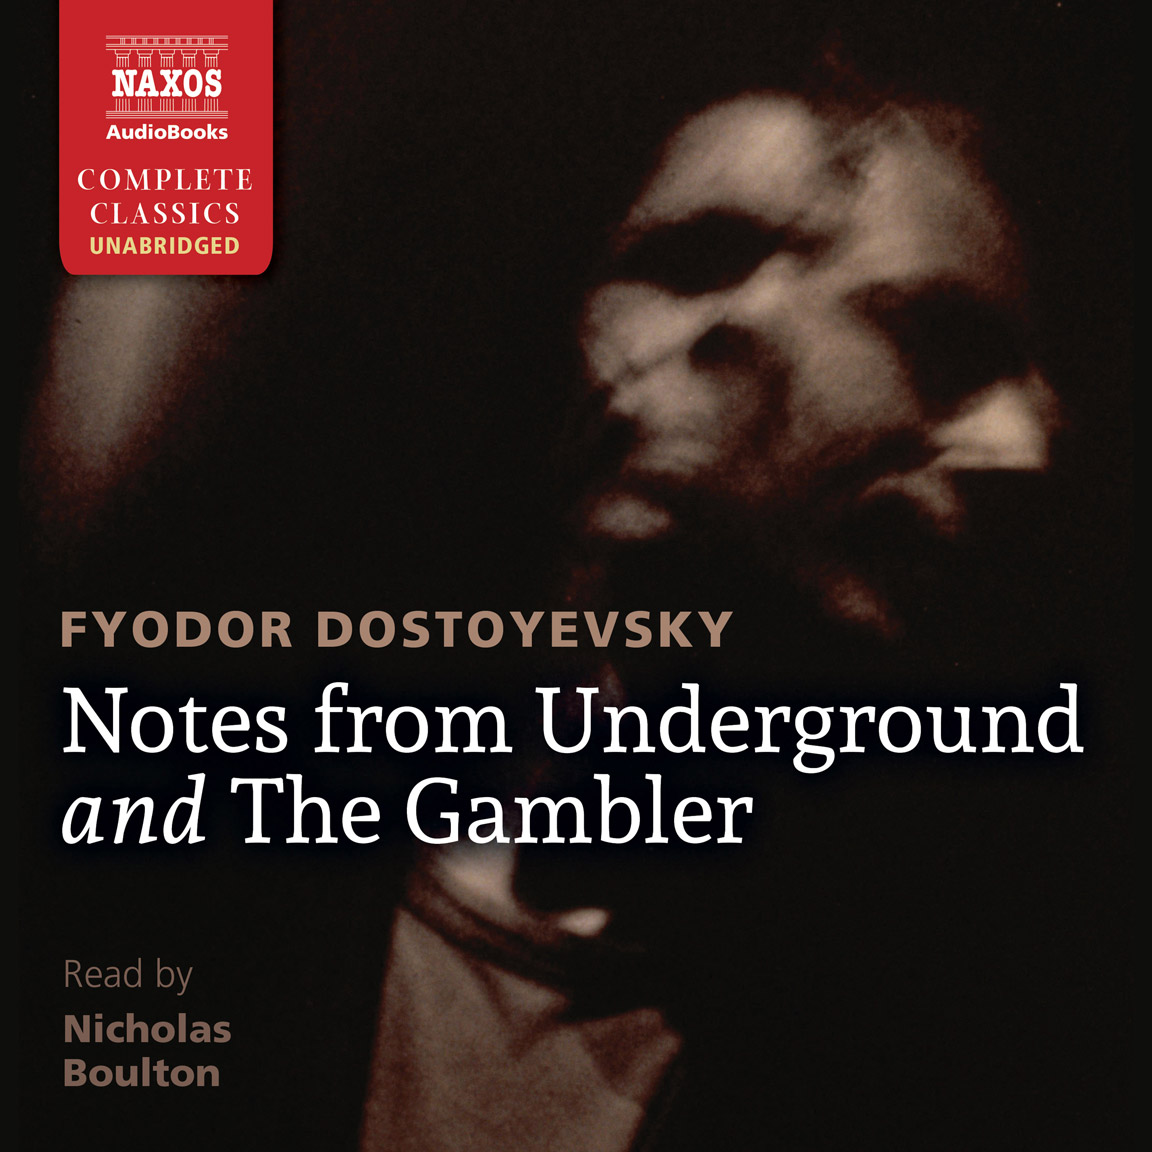 Notes from Underground and The Gambler (unabridged)